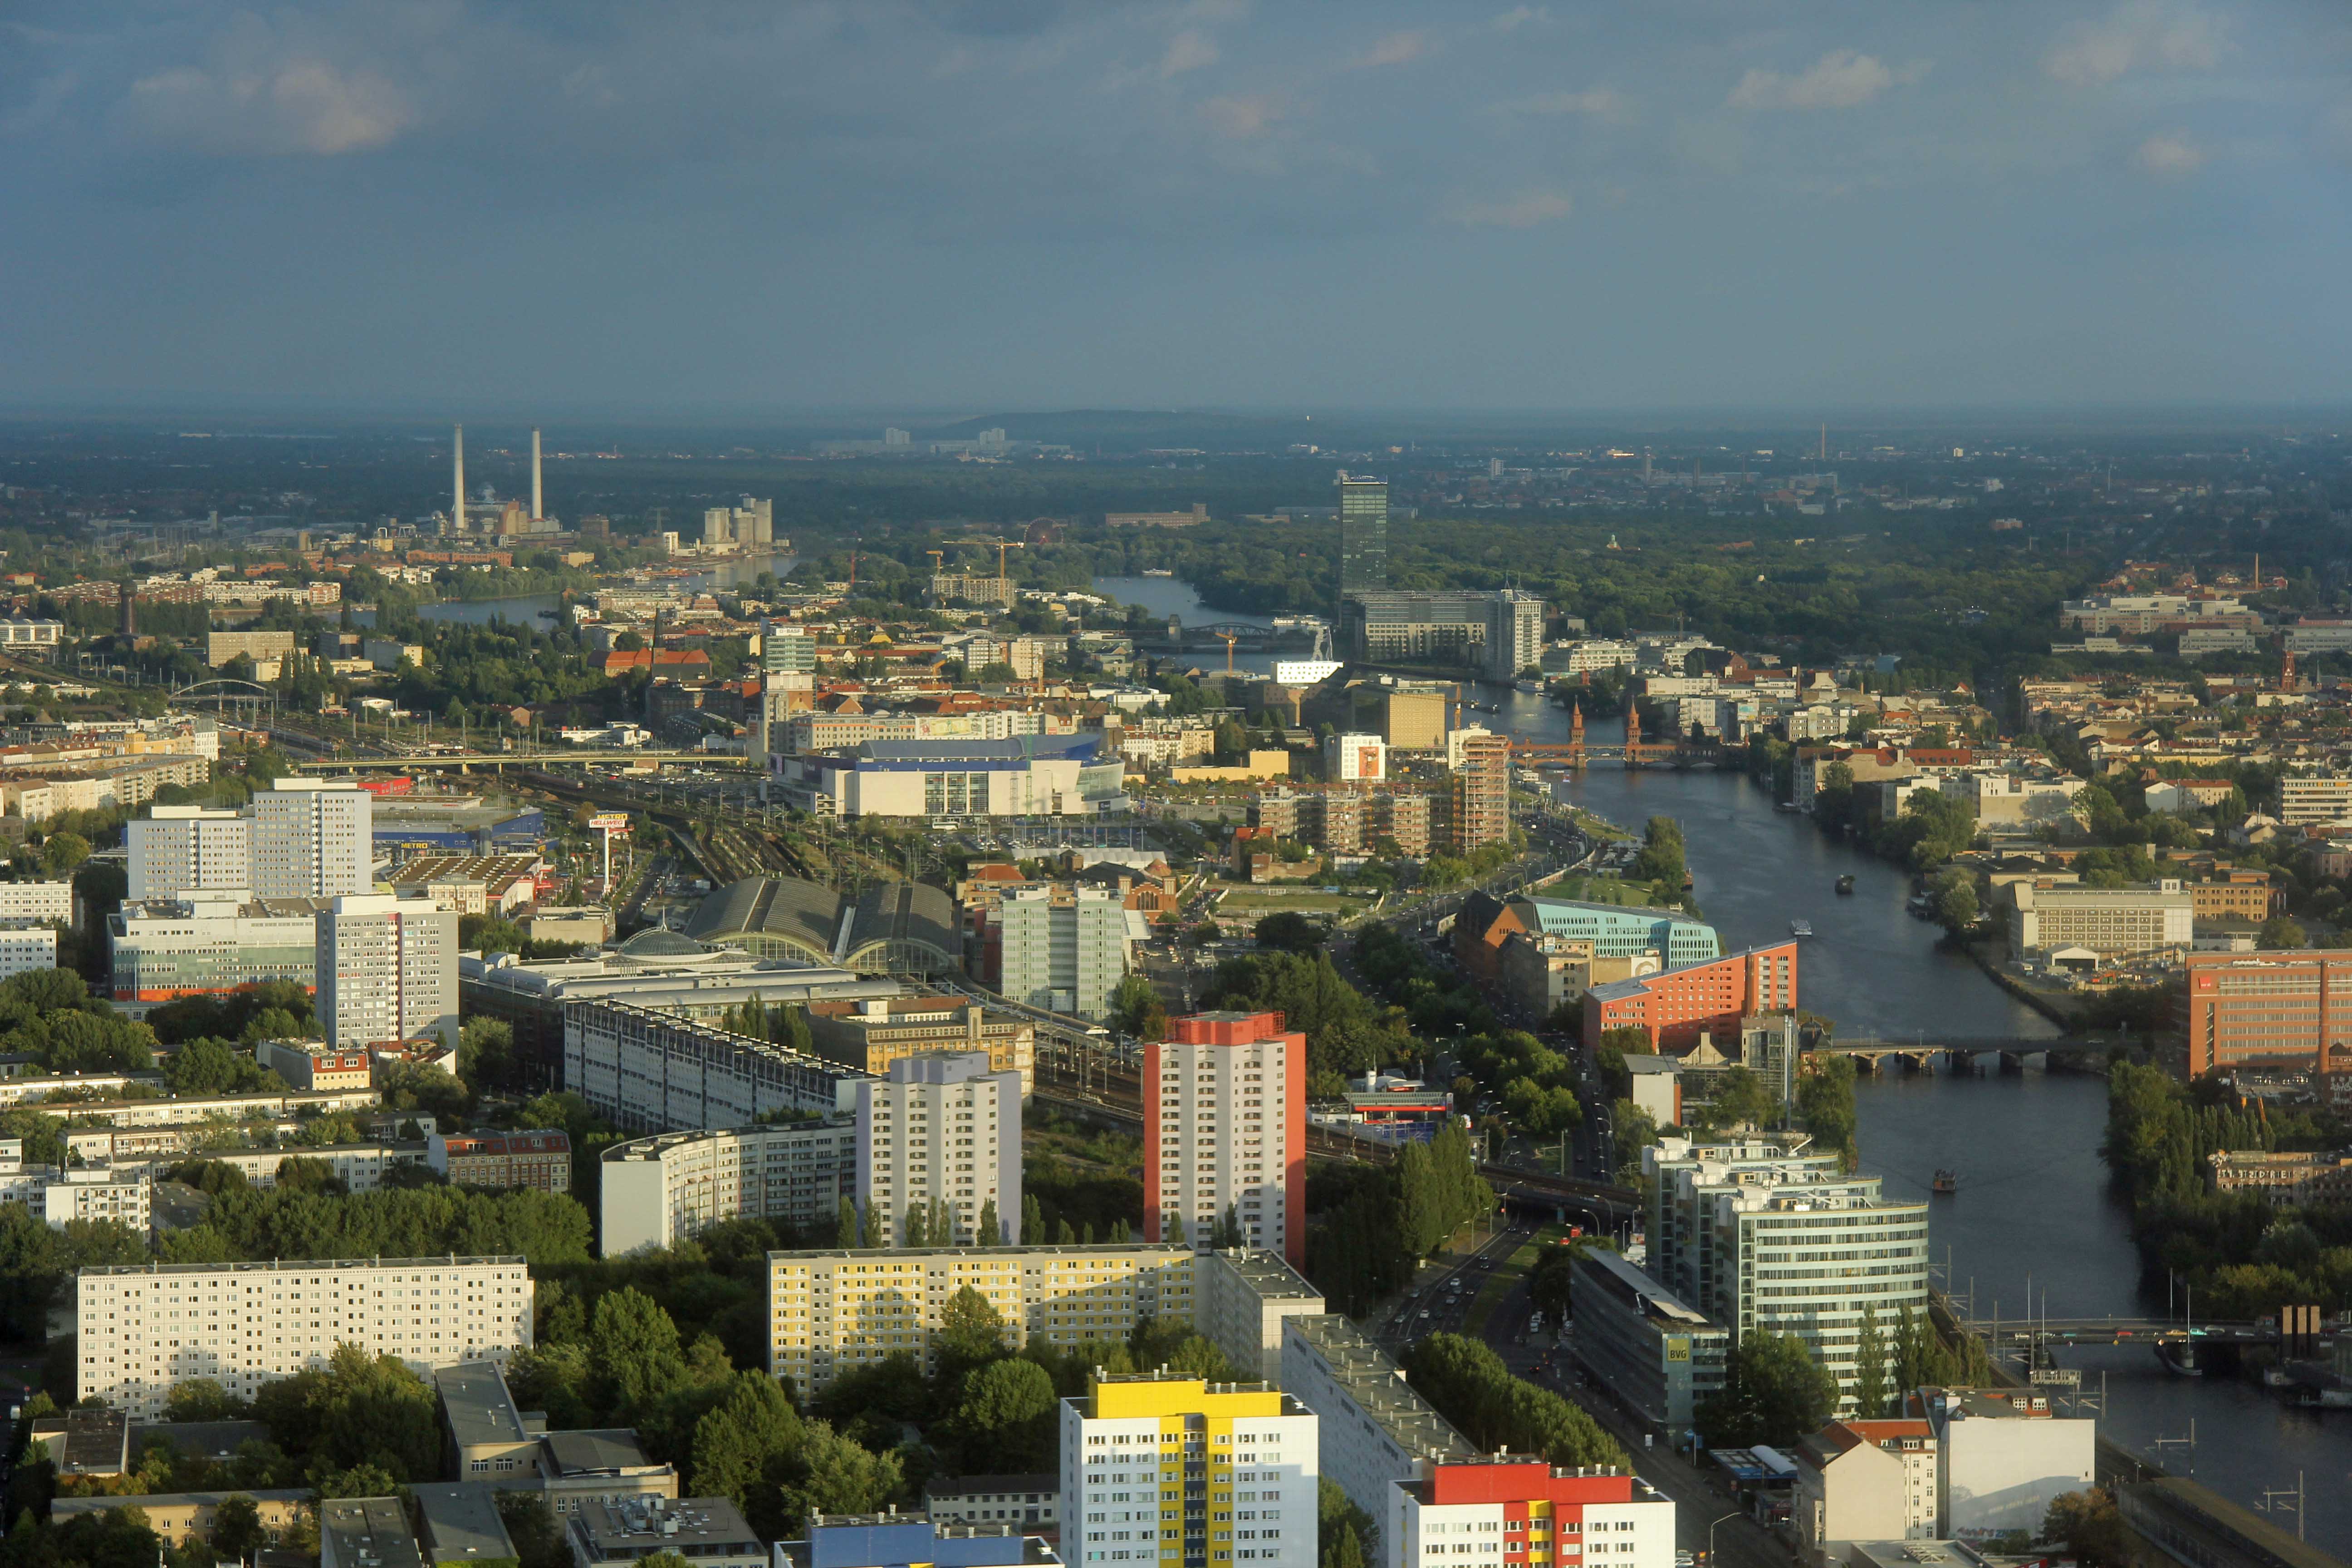 Berlin and the River Spree from the Fernehturm (TV Tower) at Alexanderplatz